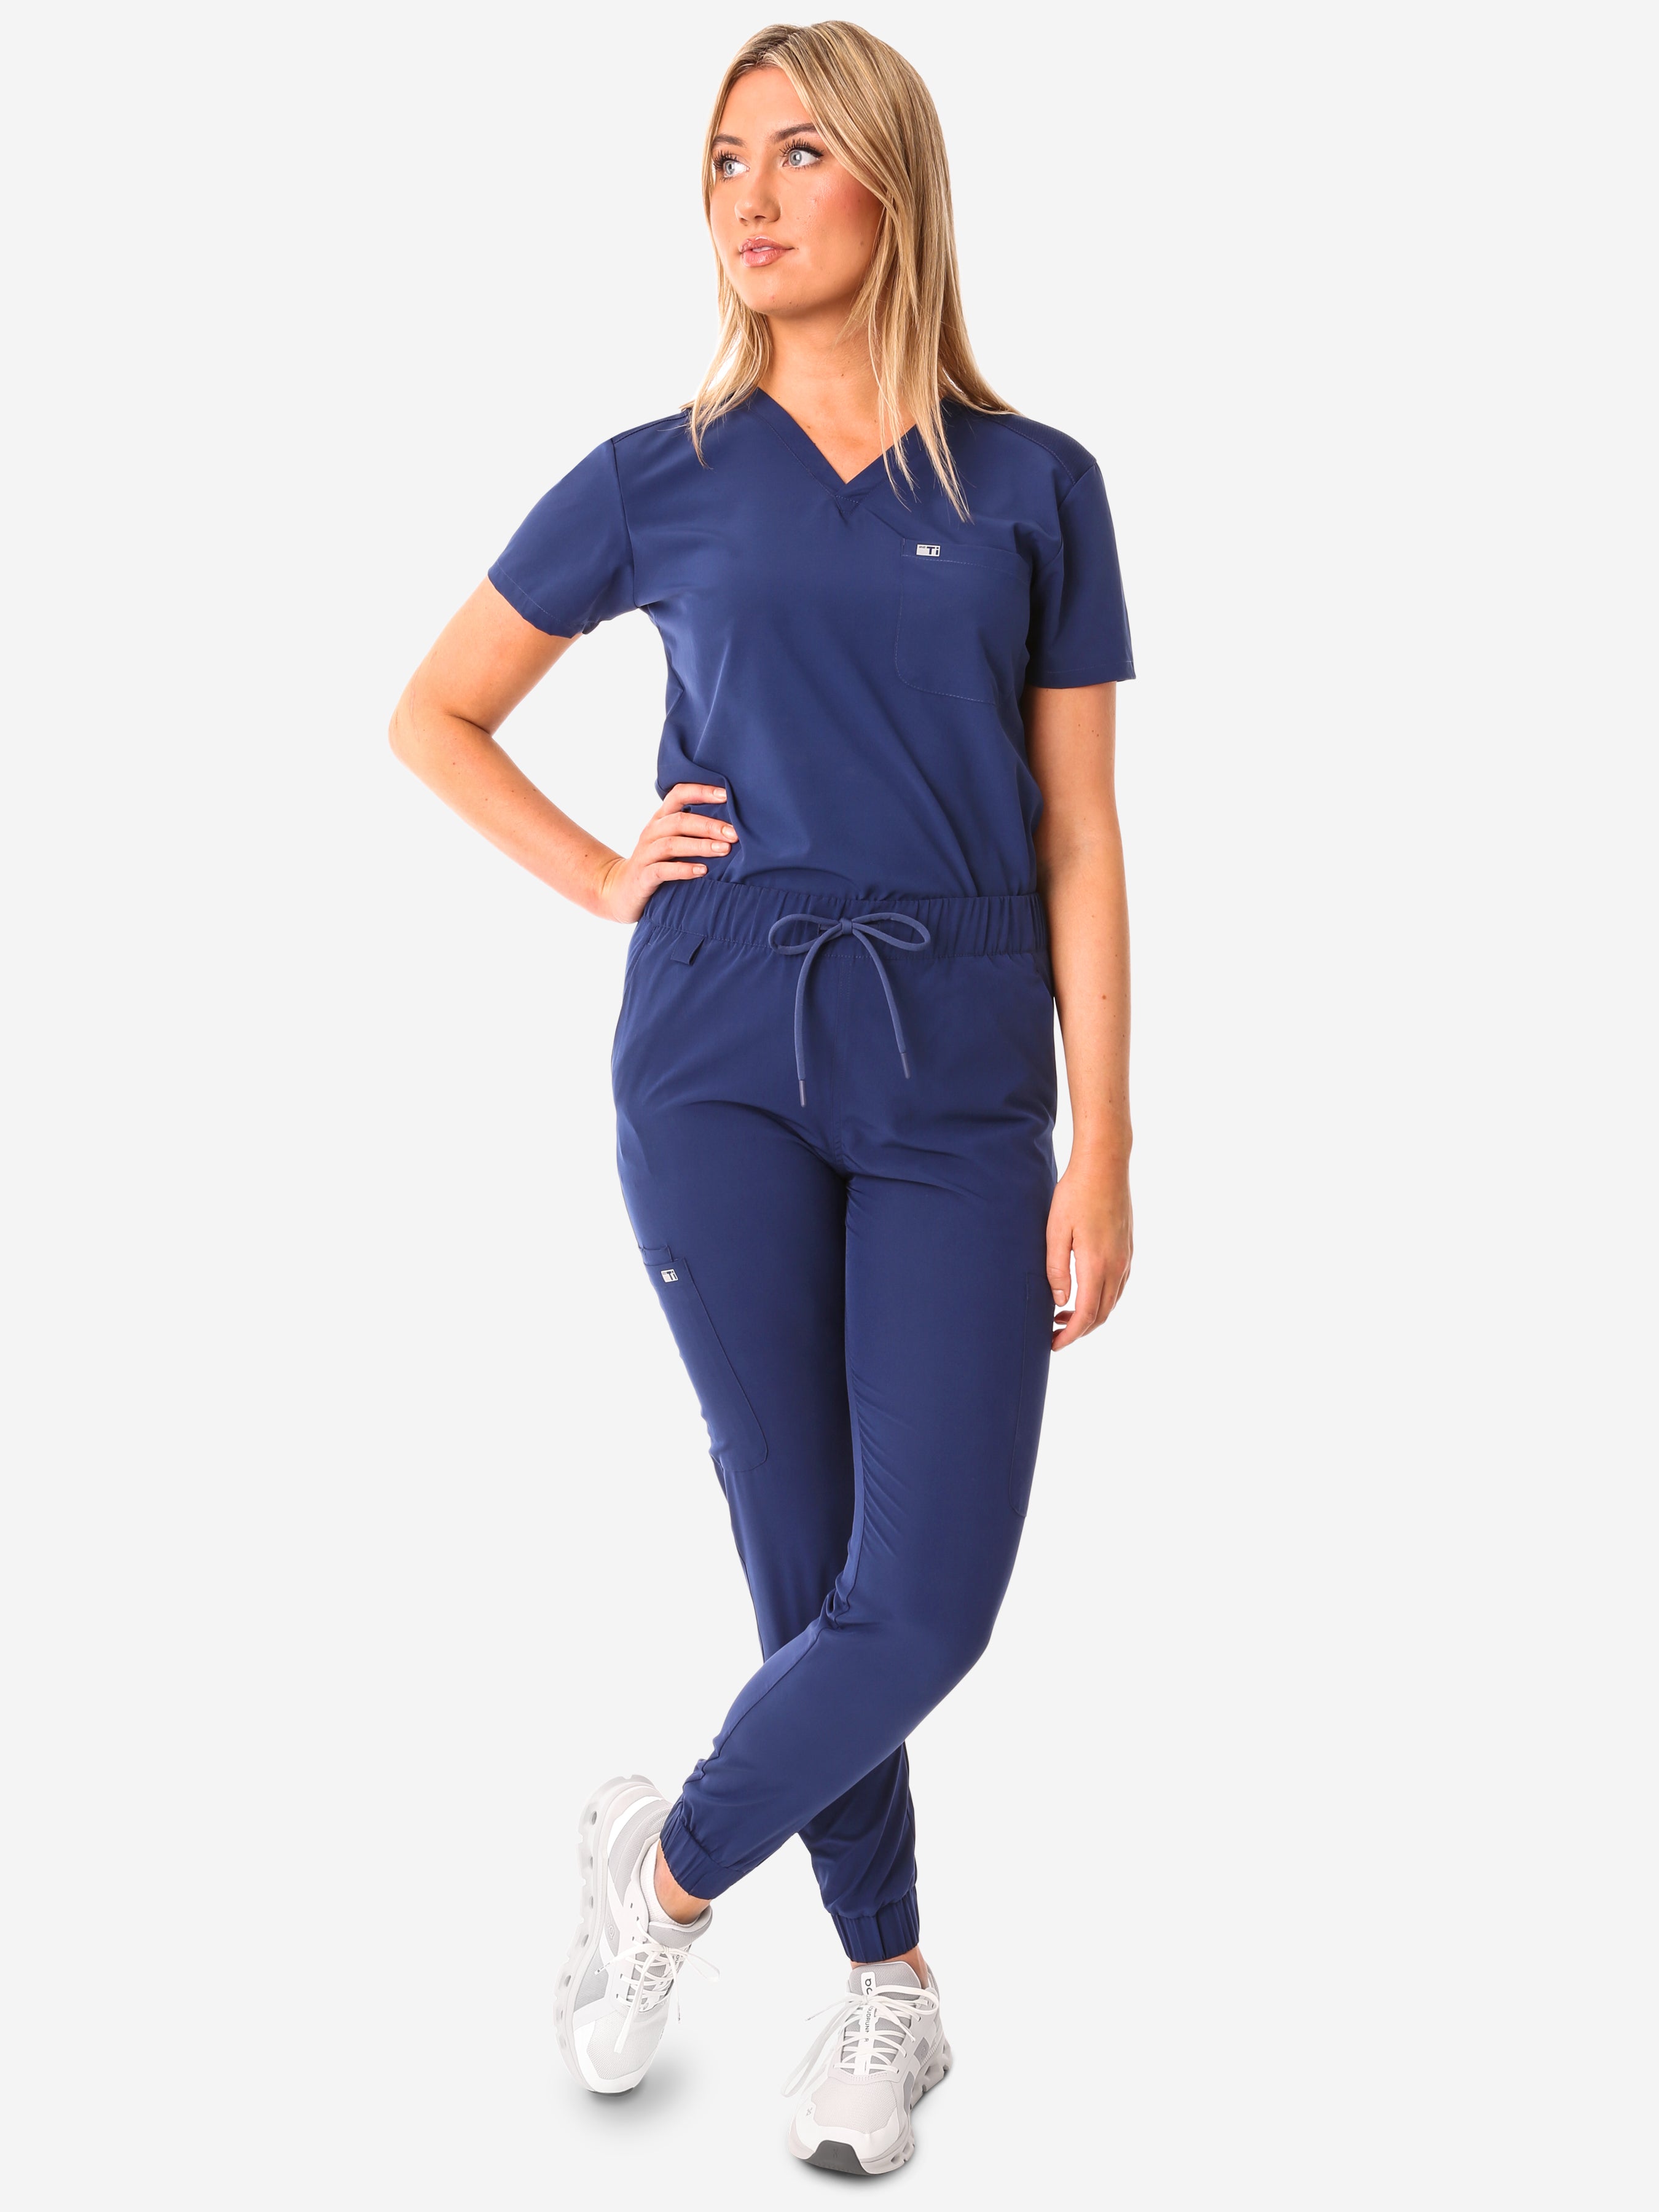 TiScrubs Navy Blue Women's Stretch Perfect Jogger Pants and One-Pocket Tuckable Top Front View Full Body